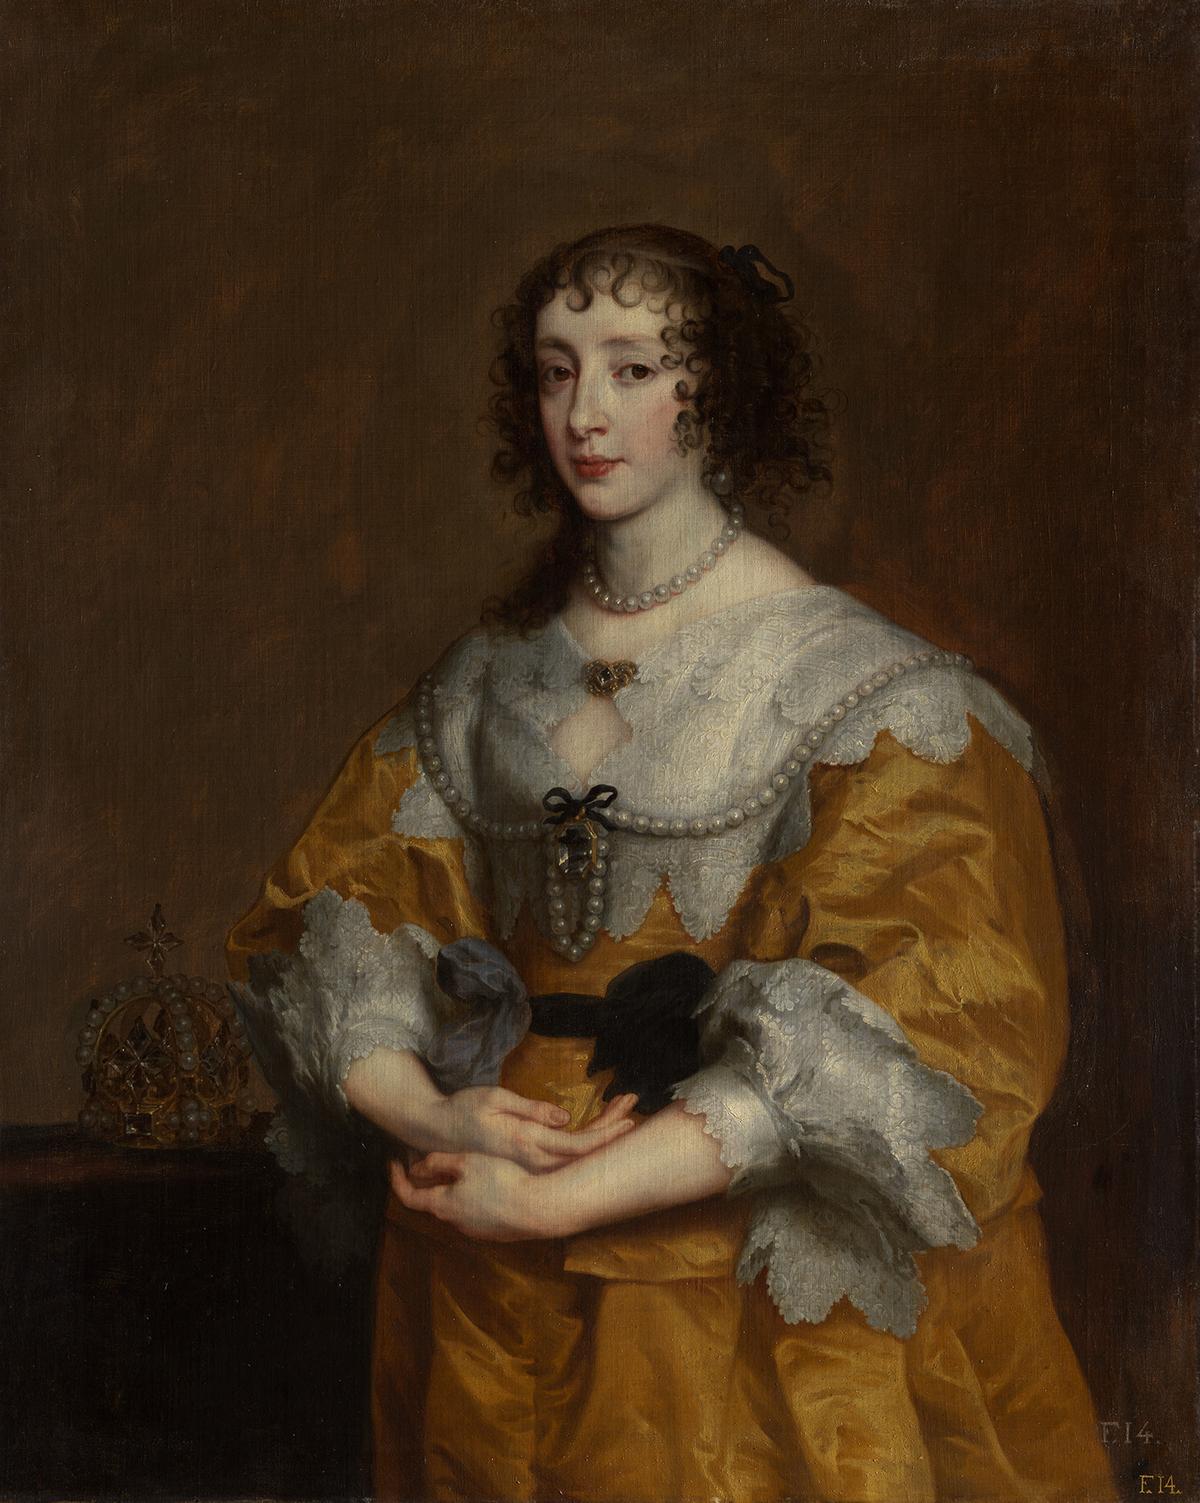 "Queen Henrietta Maria," 1636, by Anthony van Dyck. Oil on canvas; 41 5/8 inches by 33 1/4 inches. Metropolitan Museum of Art, New York City. (Public Domain)